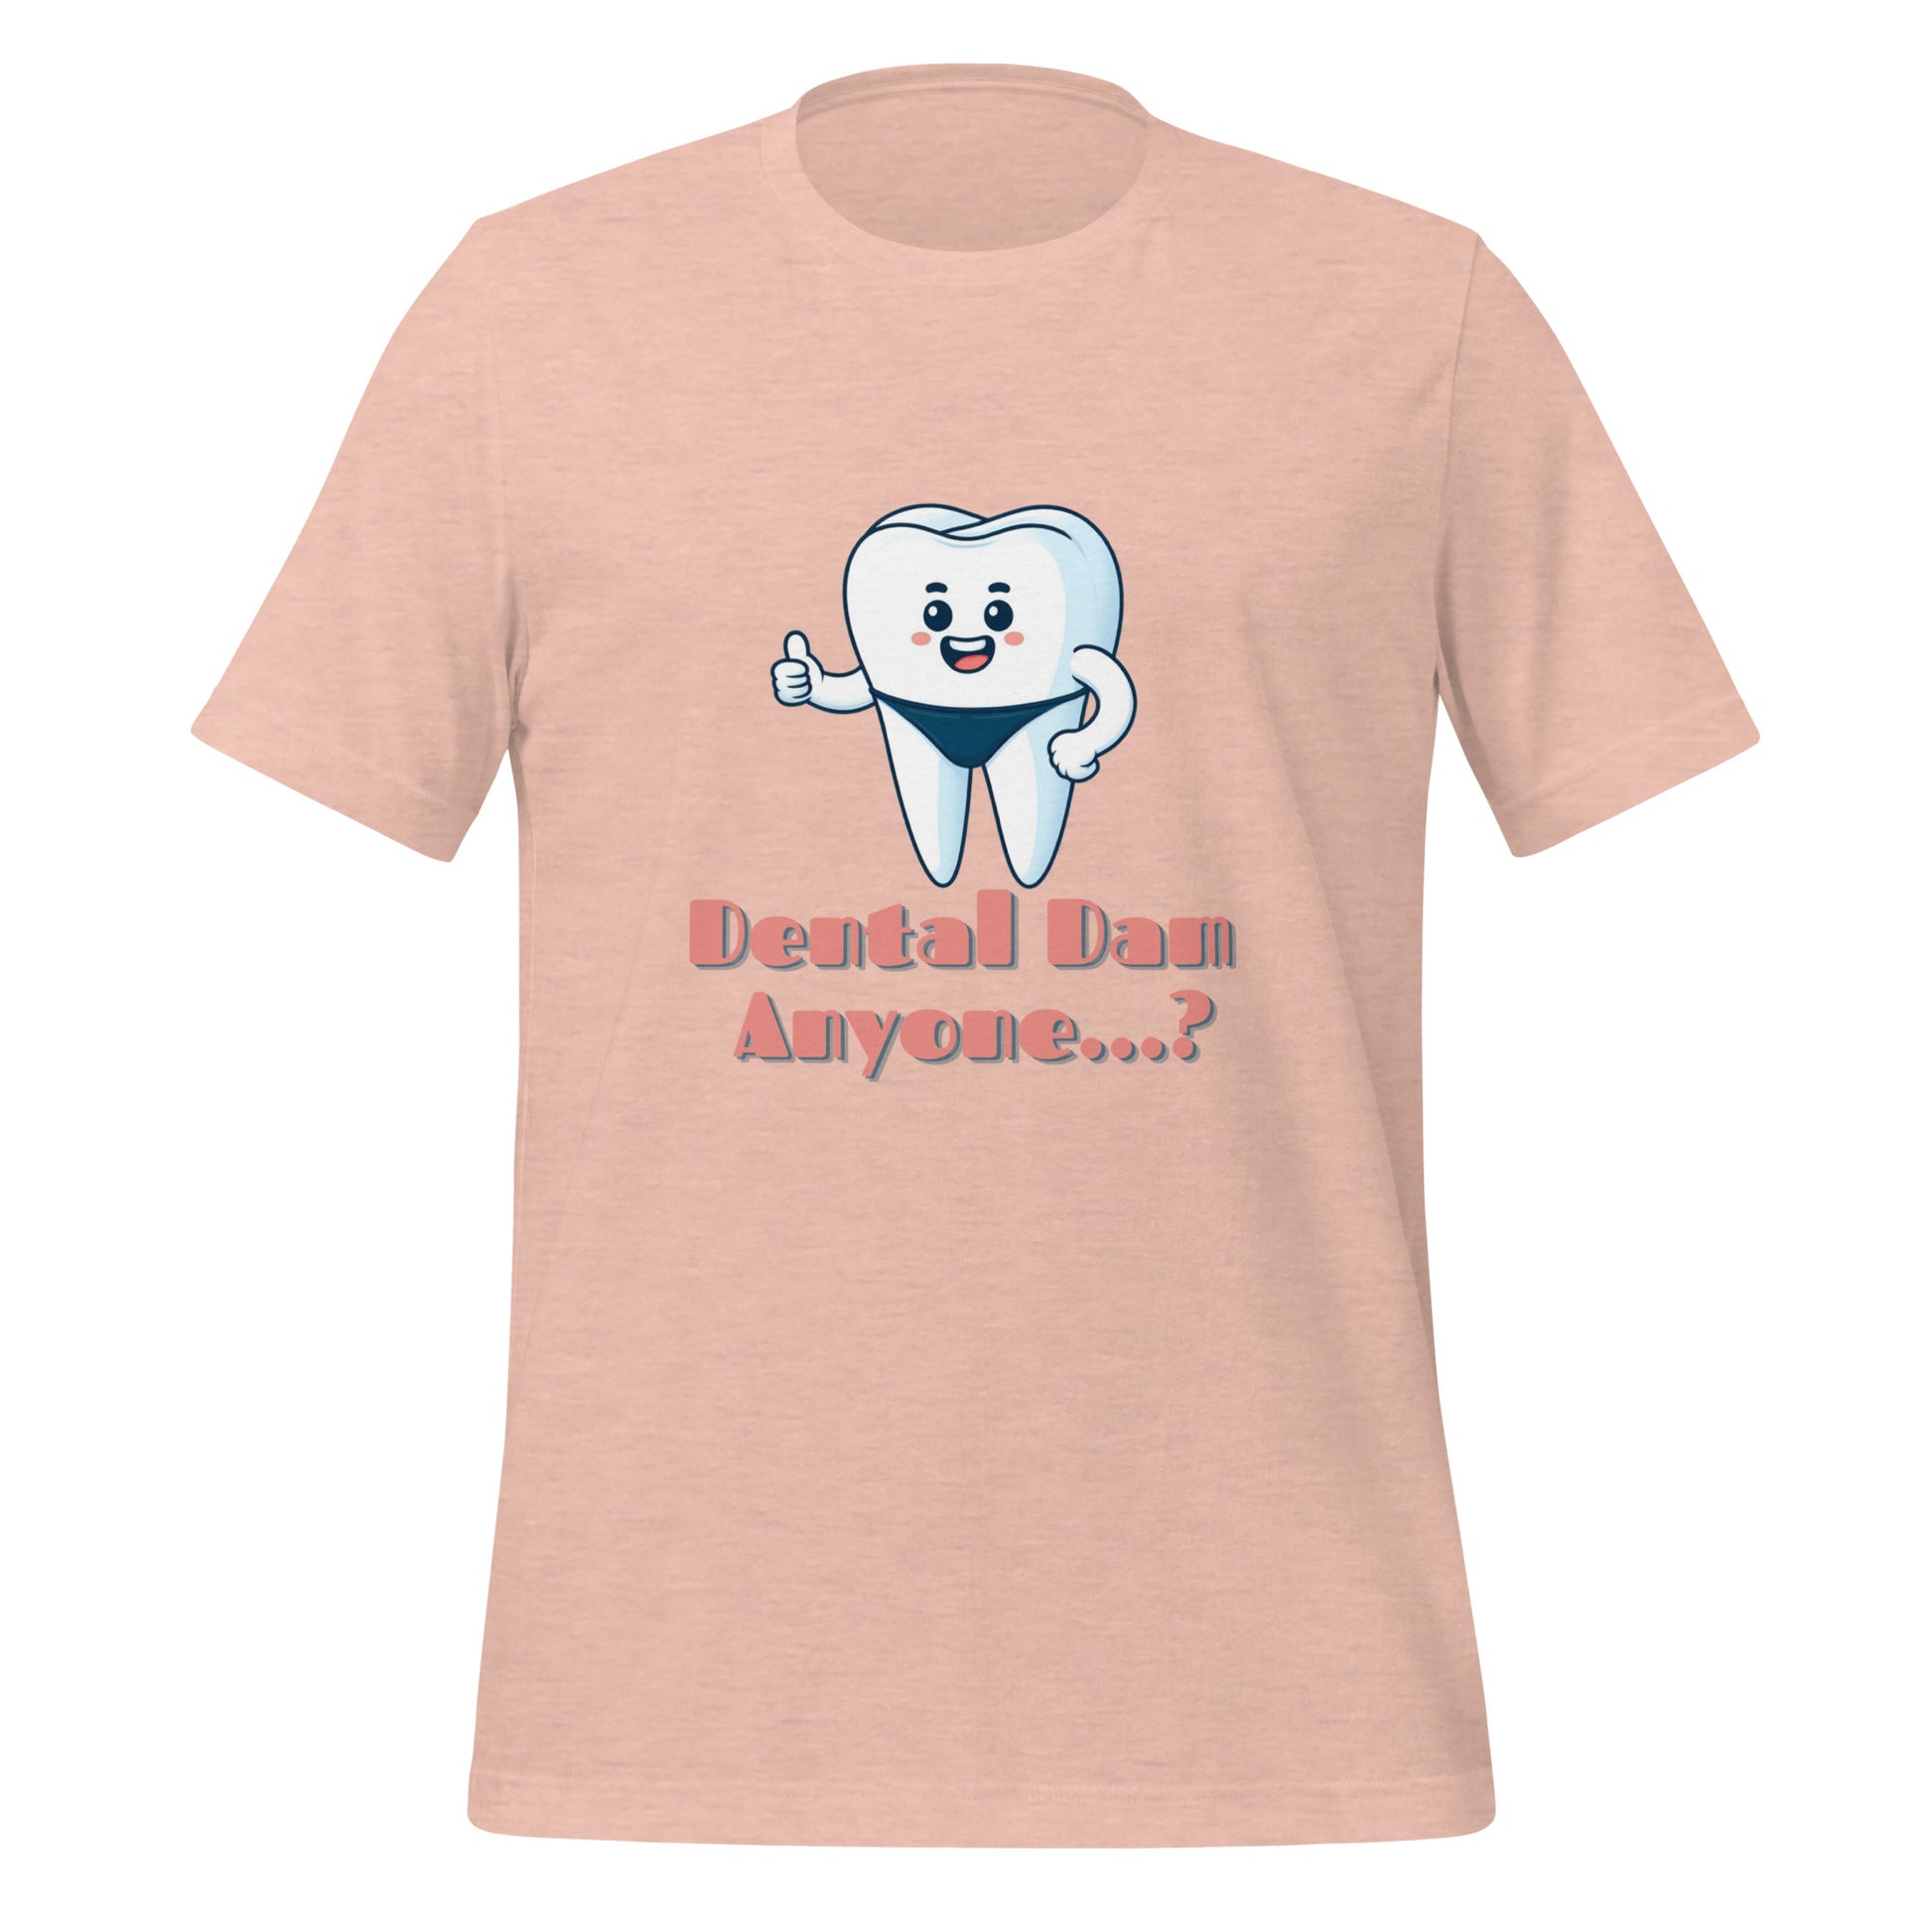 Funny dental shirt featuring a playful tooth character in a speedo with the text ‘Dental Dam Anyone?’, perfect for dentists, dental hygienists, and dental students who enjoy dental humor. This dental shirt is a unique addition to any dental professional’s wardrobe, making it an ideal dental office shirt. Don’t miss out on our dental assistant shirts and dental hygiene shirts. Heather prism peach color.